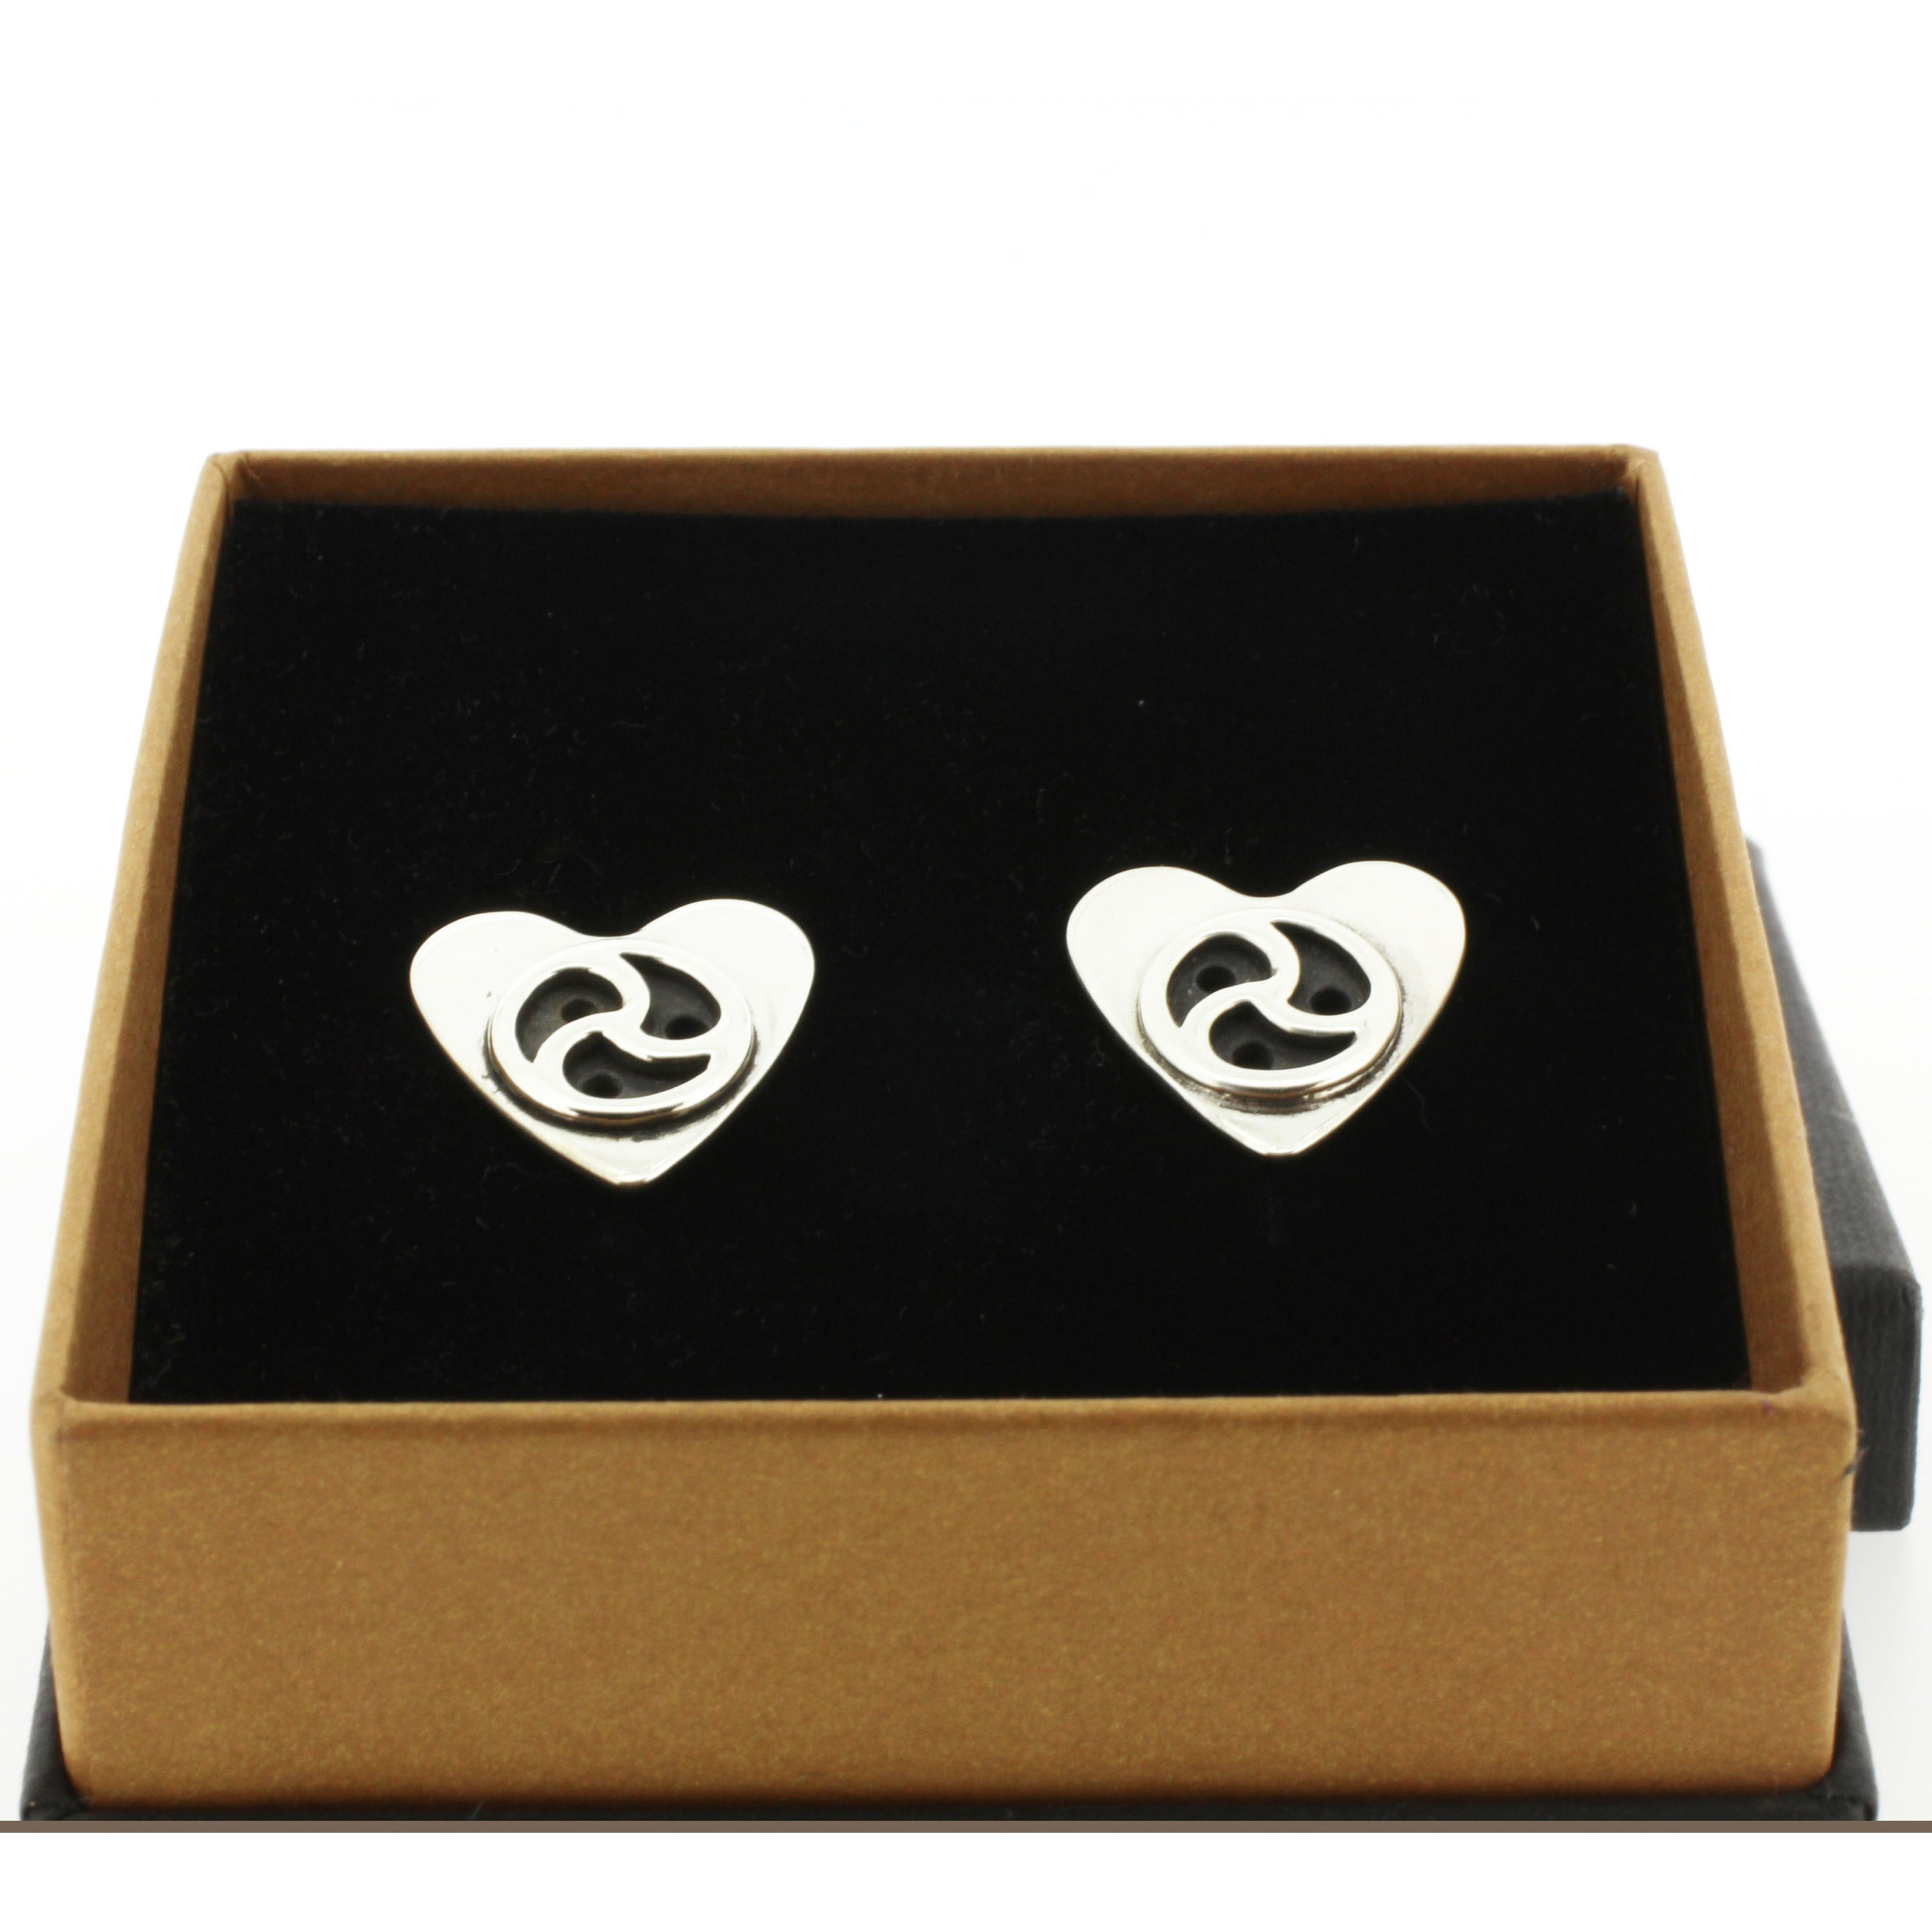 Sterling Silver (925) BDSM Triskele Heart-Shaped Cuff Links for Casual and Formal Wear